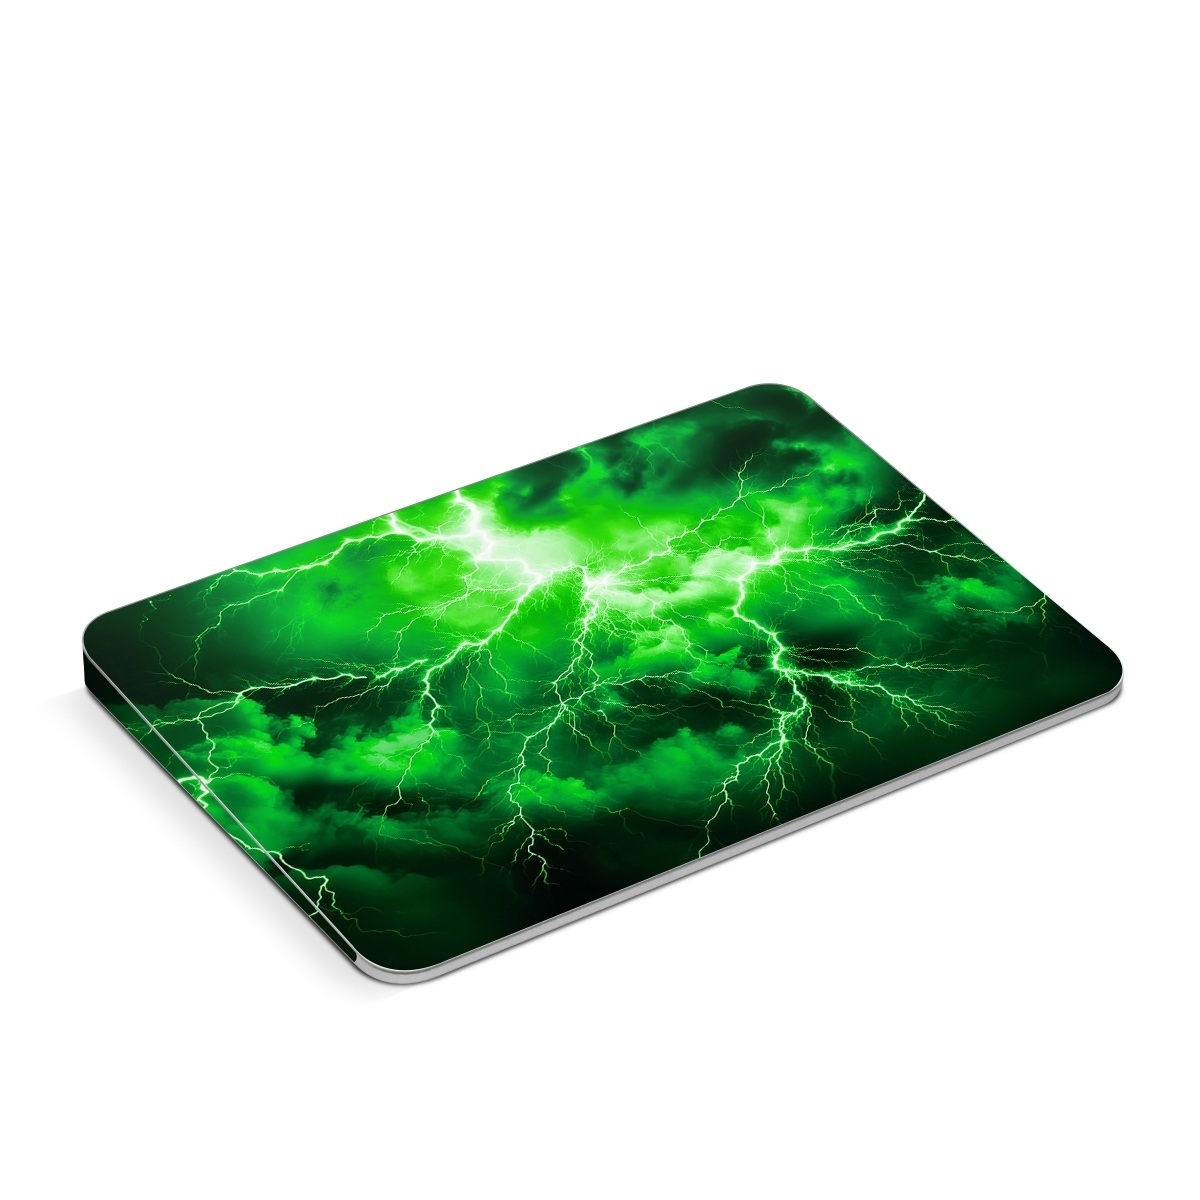 Apple Magic Trackpad Skin design of Water, Atmosphere, Thunder, Light, Green, Sky, Natural environment, Natural landscape, Electricity, Organism, with black, green colors